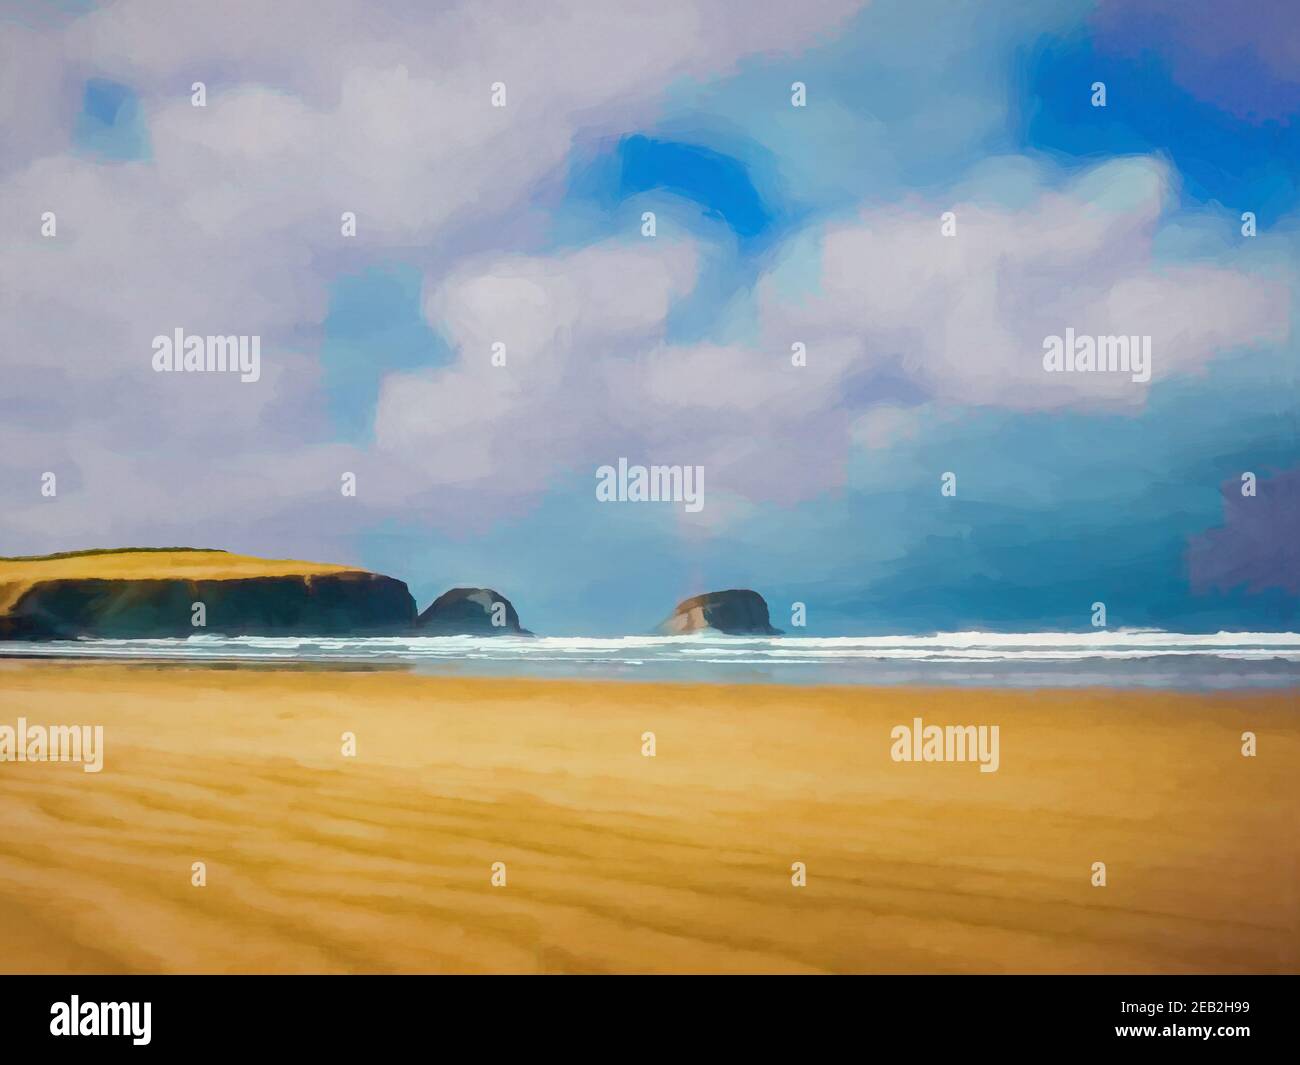 Digital painting of the view across a beach in New Zealand, with rocky outcrops. Stock Photo